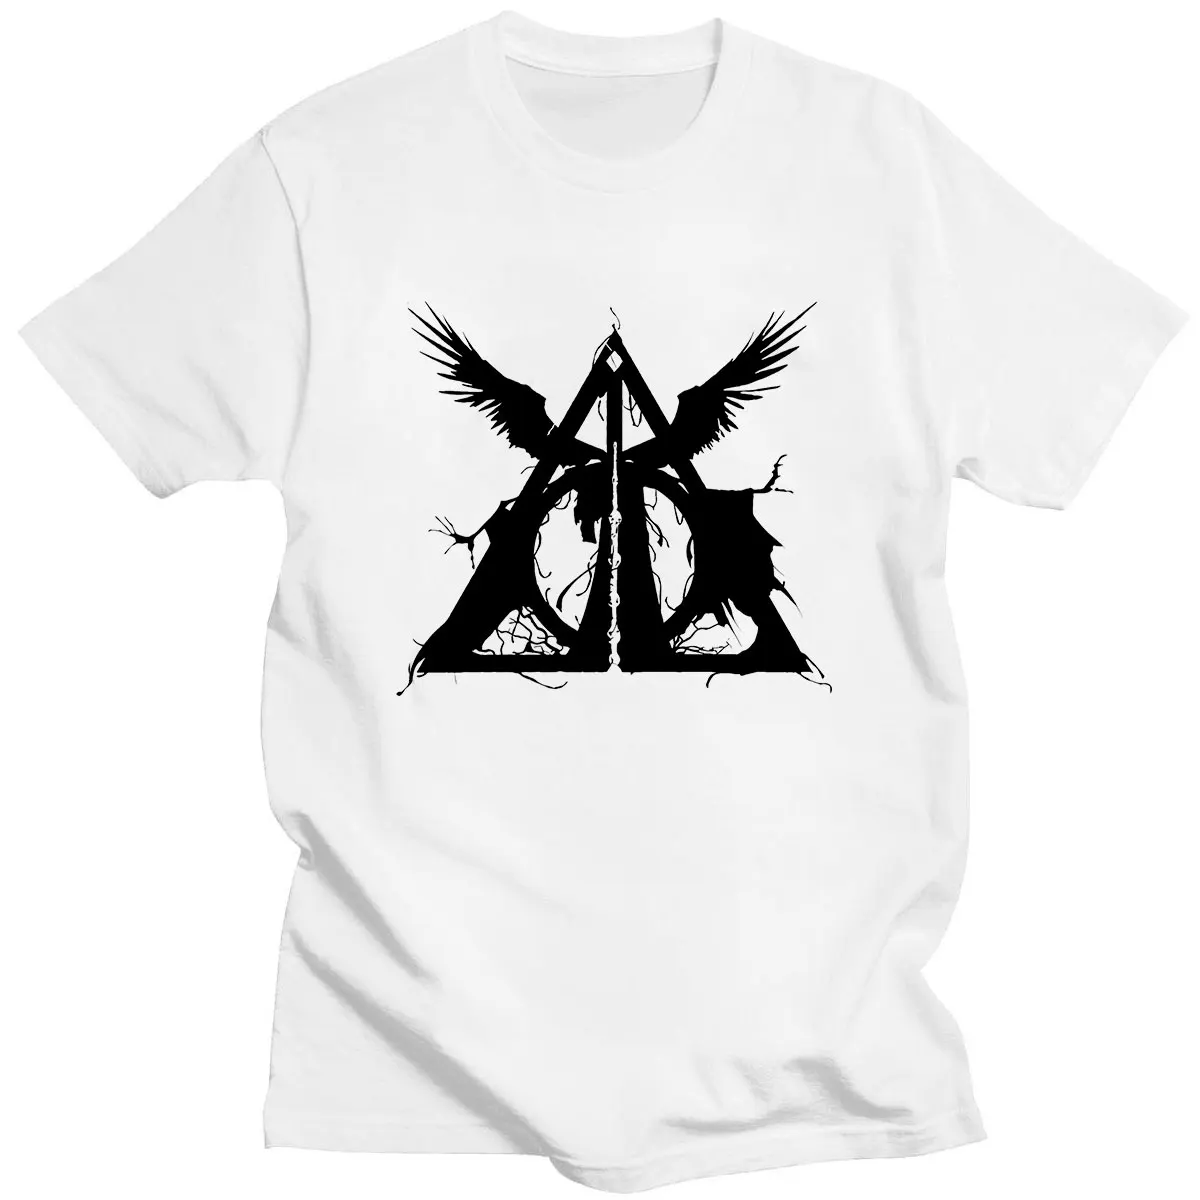 

Three Brothers Tale Deathly Hallows Hip-Pop Clothes Fashion Streetwear Fashion T-Shirt Casual Men's Tees Daily Comfortable Tops